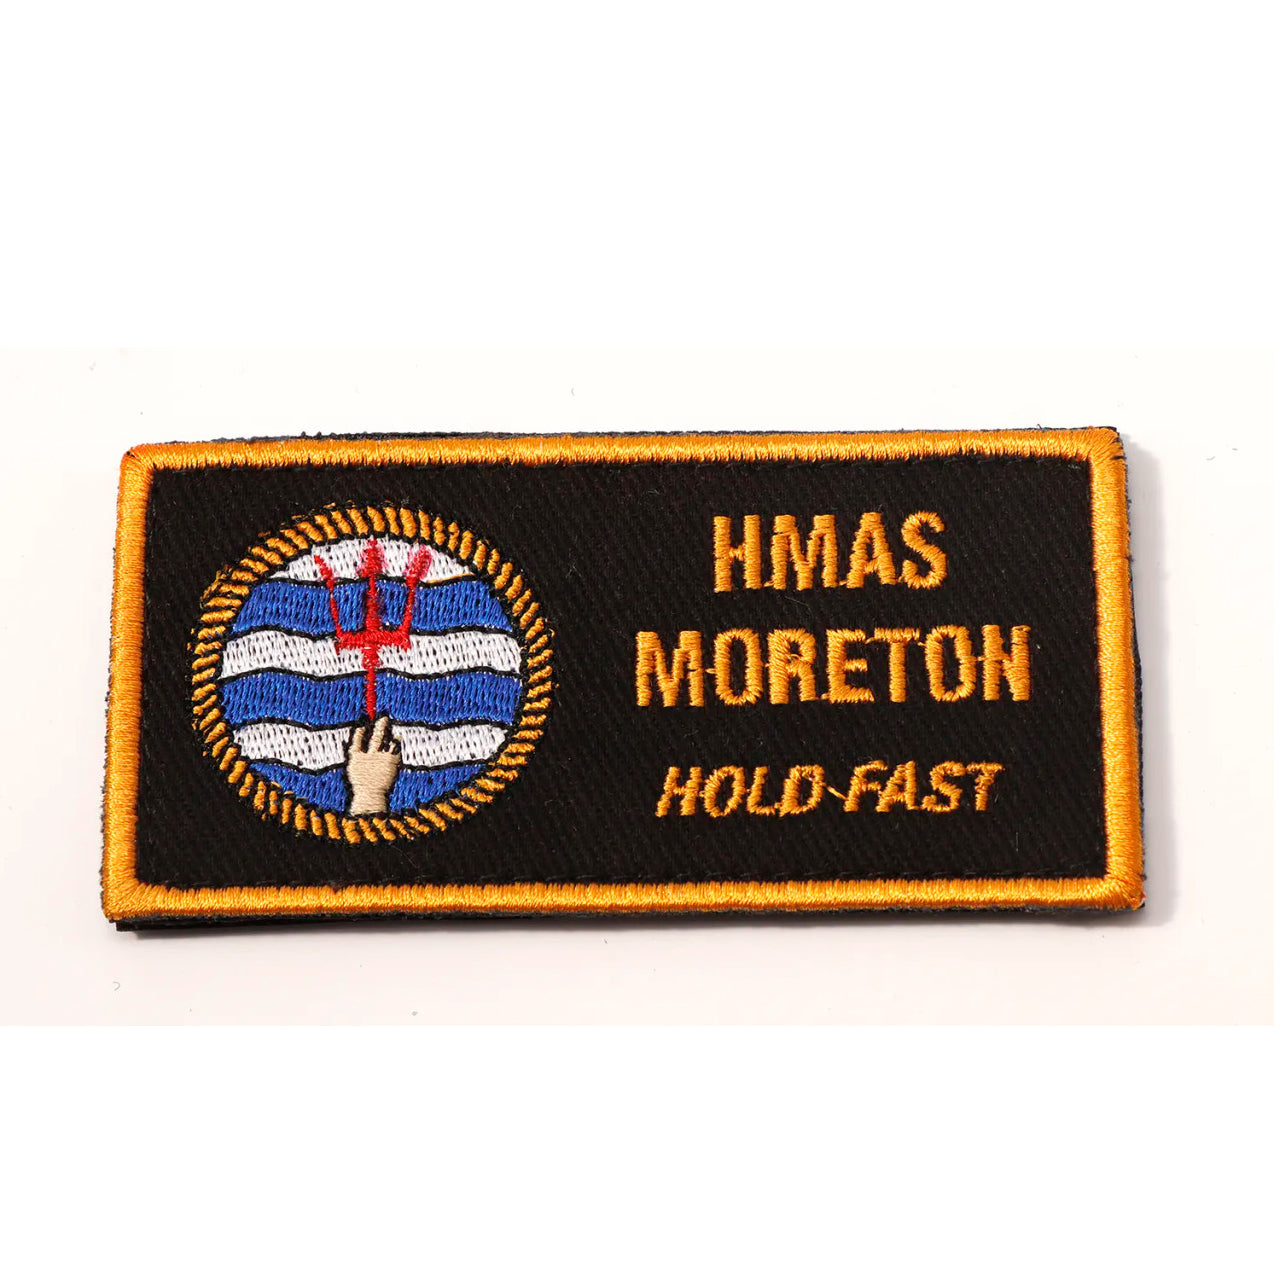 Fuel your love for the Navy with the HMAS Moreton DPNU Patch. This unique patch is a highly coveted symbol of pride and exclusivity, meticulously crafted from top-quality woven material for unbeatable durability. www.defenceqstore.com.au